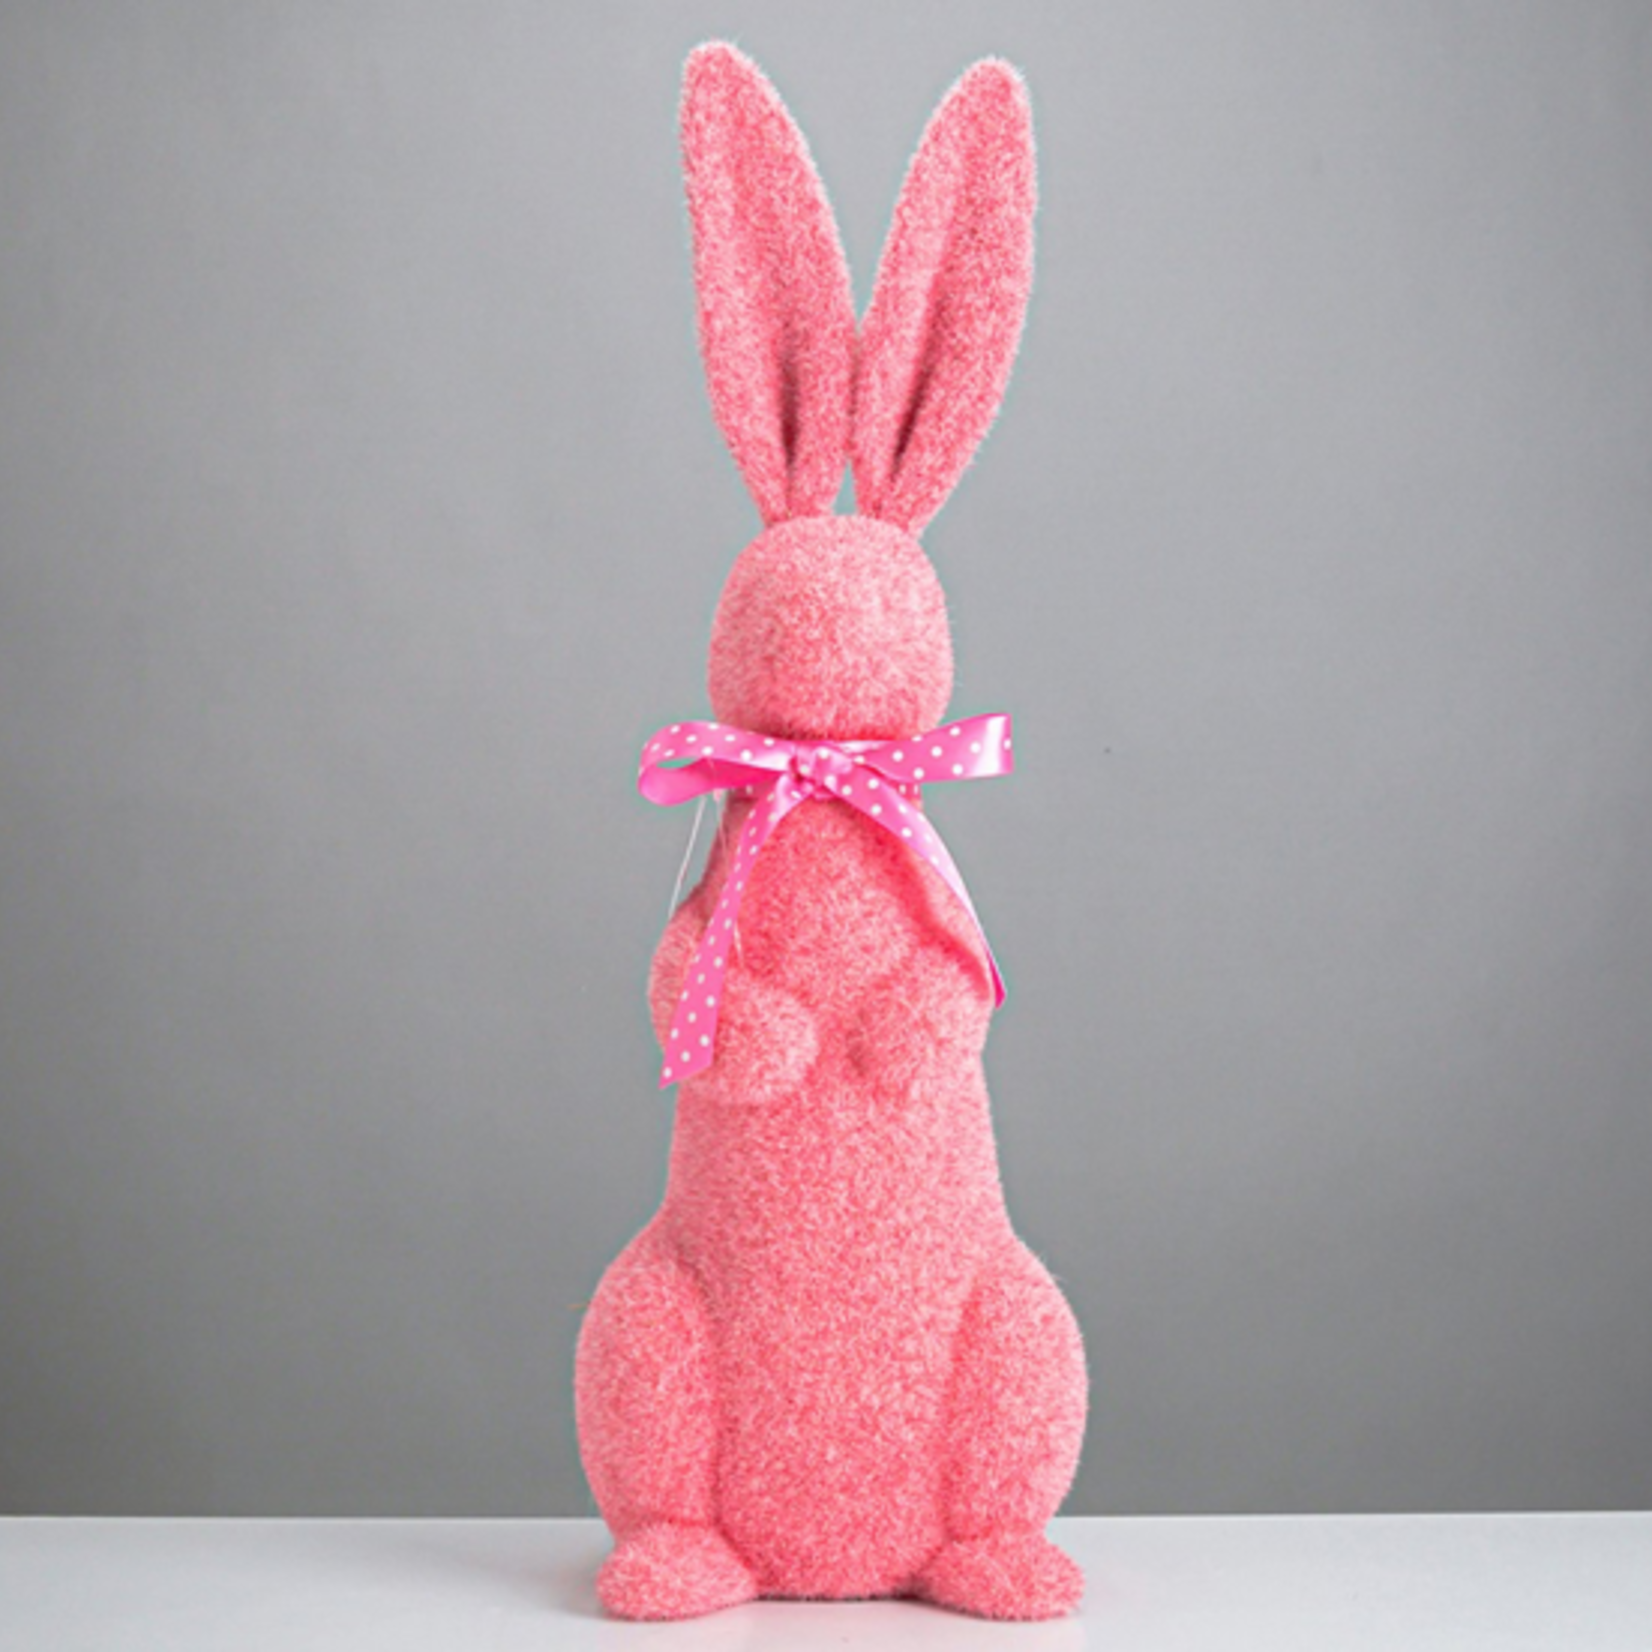 16.5”H X 5.5”H X 5” PLUSH FURRY EASTER BUNNY ASSORTED COLORS